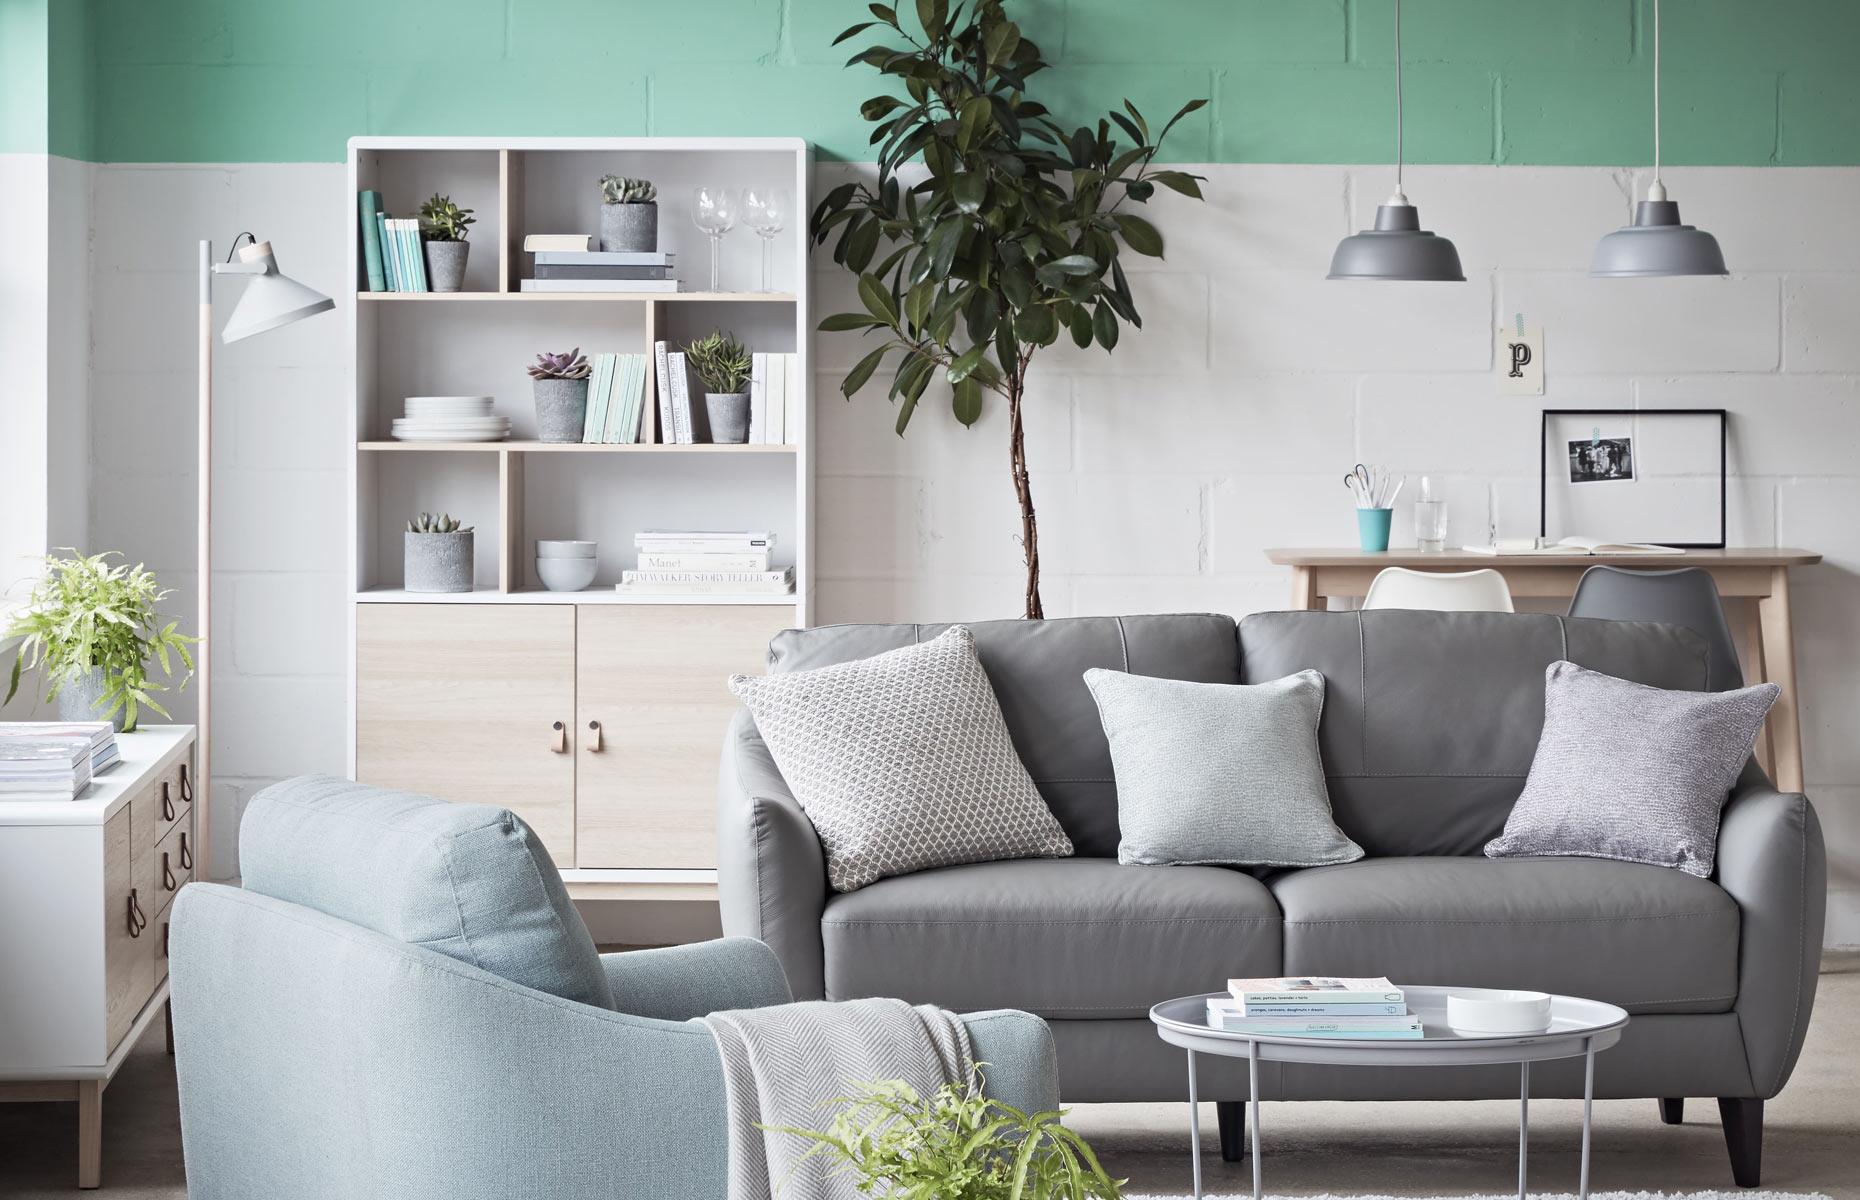 <p>Unify a small open-plan living room with an <a href="https://www.loveproperty.com/gallerylist/91682/30-paint-decorating-ideas-youll-want-to-try?page=1">on-trend paint technique</a>. When space is tight, look to the upper portion of the walls and the ceiling. Paint this upper area a refreshing shade to make a statement across the entire room. Choose crisp white for the lower parts of the walls to create contrast; it will also reflect the light and maximize the feeling of space. Blonde wood and white furniture set against the walls add to the vibrancy of this invigorating room. </p>